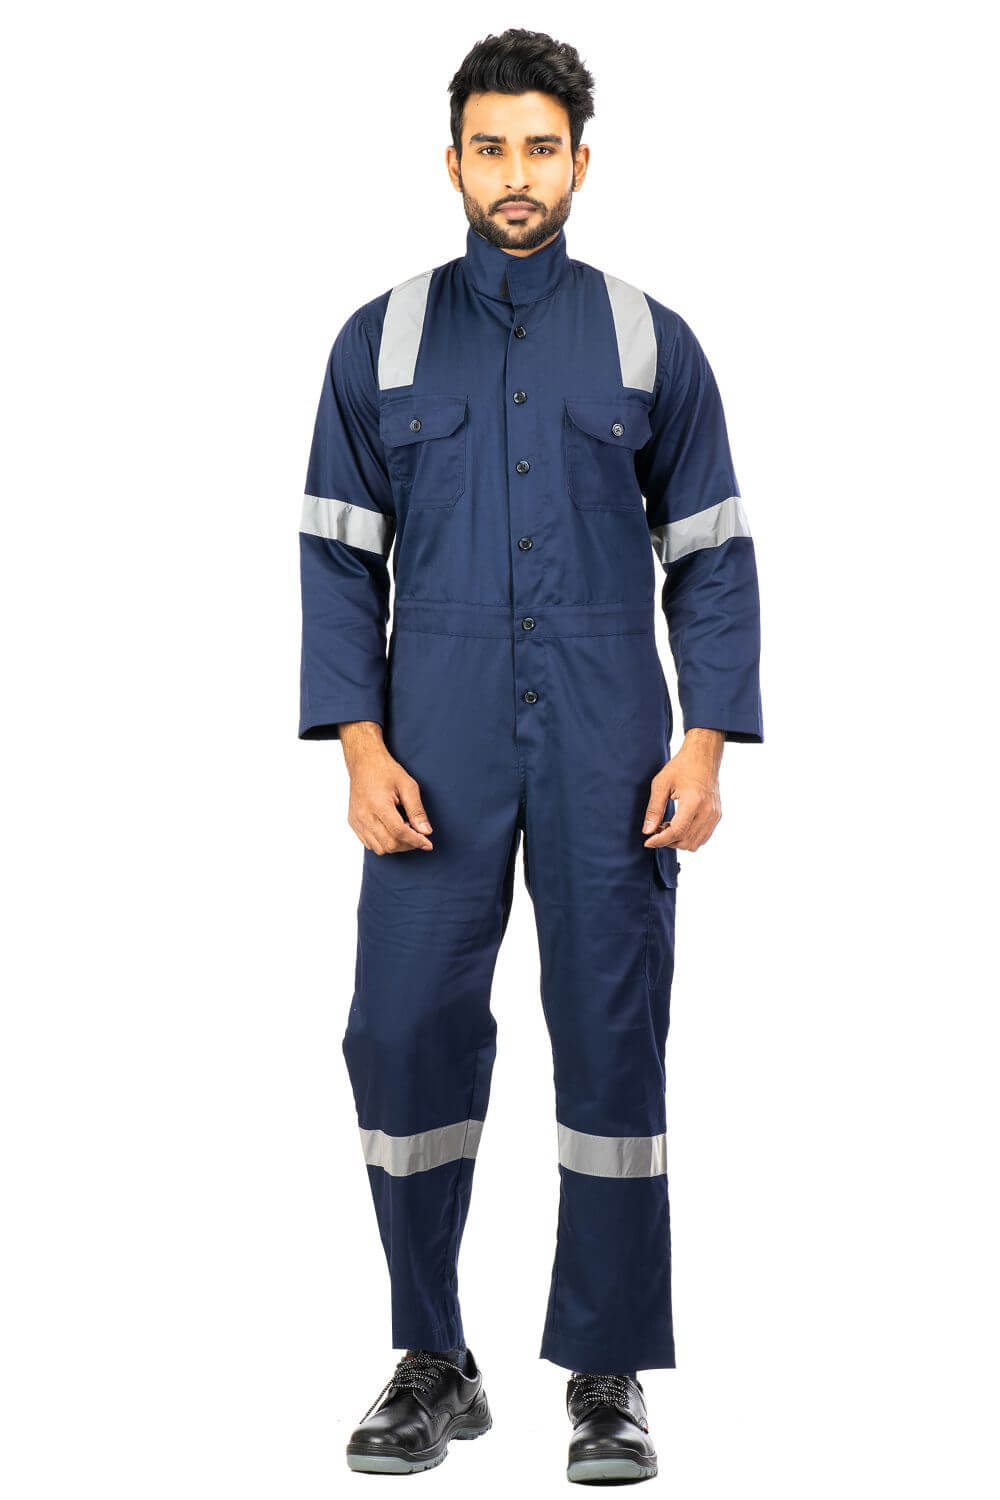 AS/NZS 4602.1:2011 standards compliant light-weight protective coverall for industrial use.